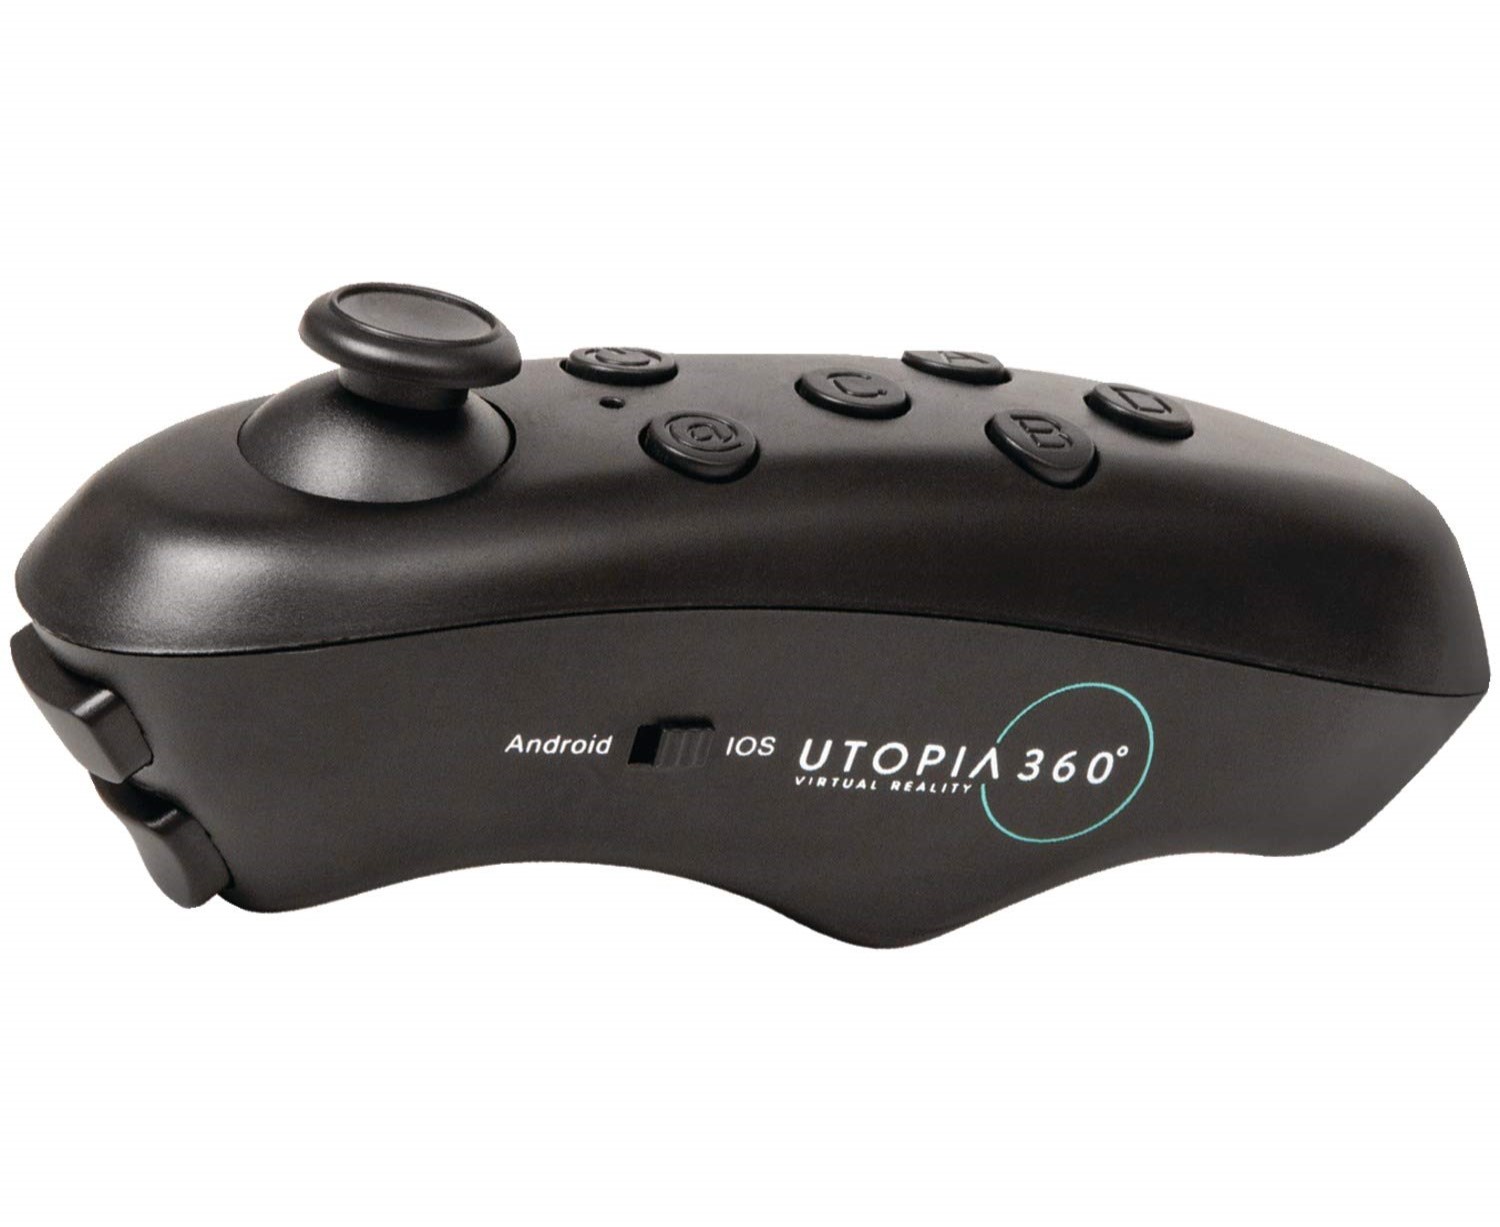 How Do You Connect Utopia 360 Bluetooth Game Controller To Your CT TEK VR